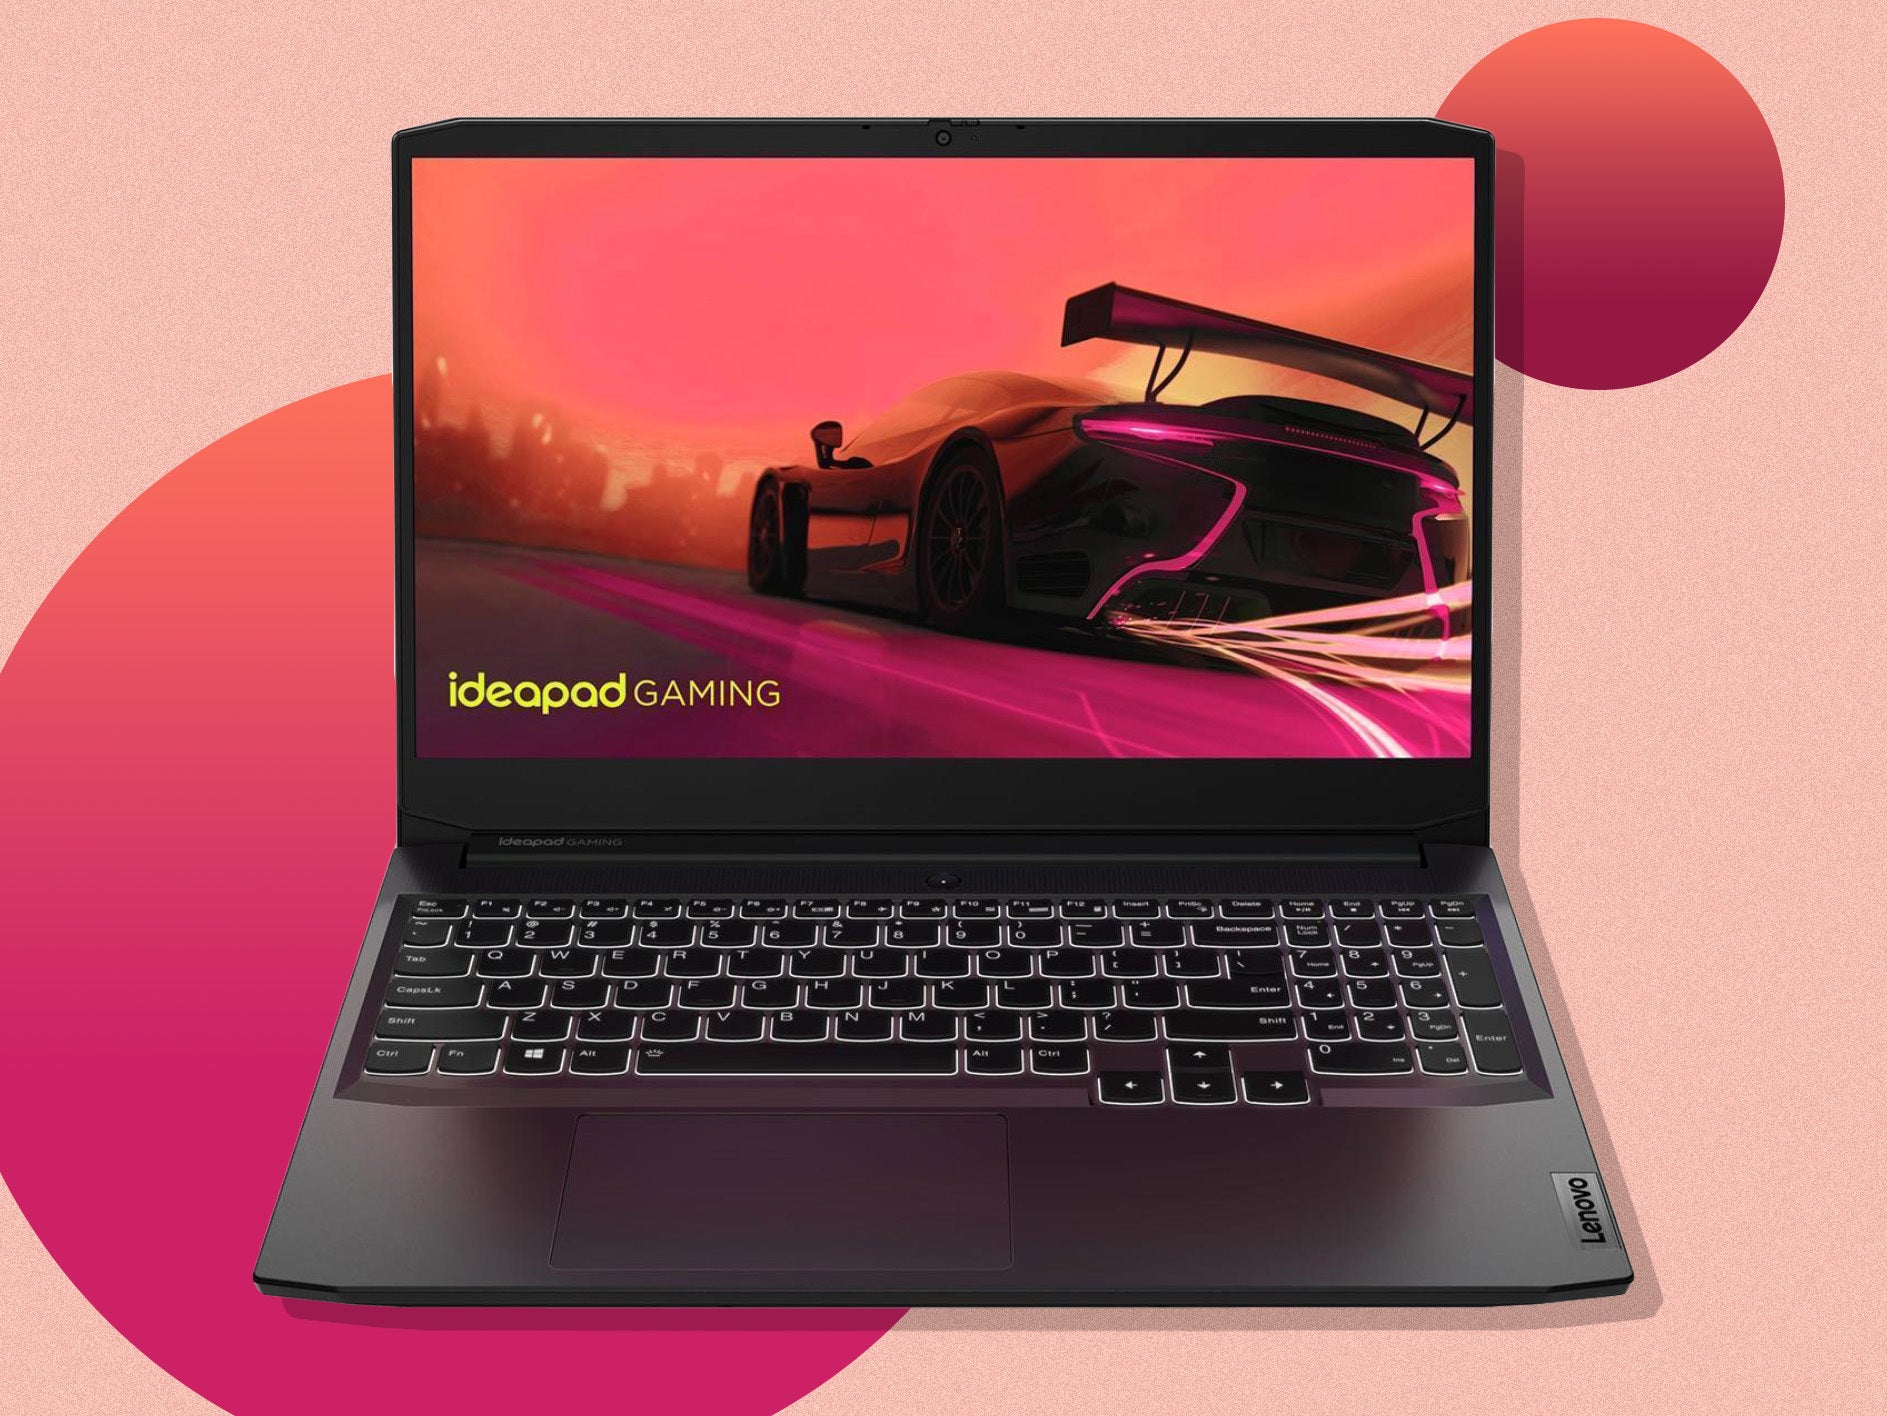 Lenovo Ideapad Gaming Discount The Cheapest RTX Laptop Deal We